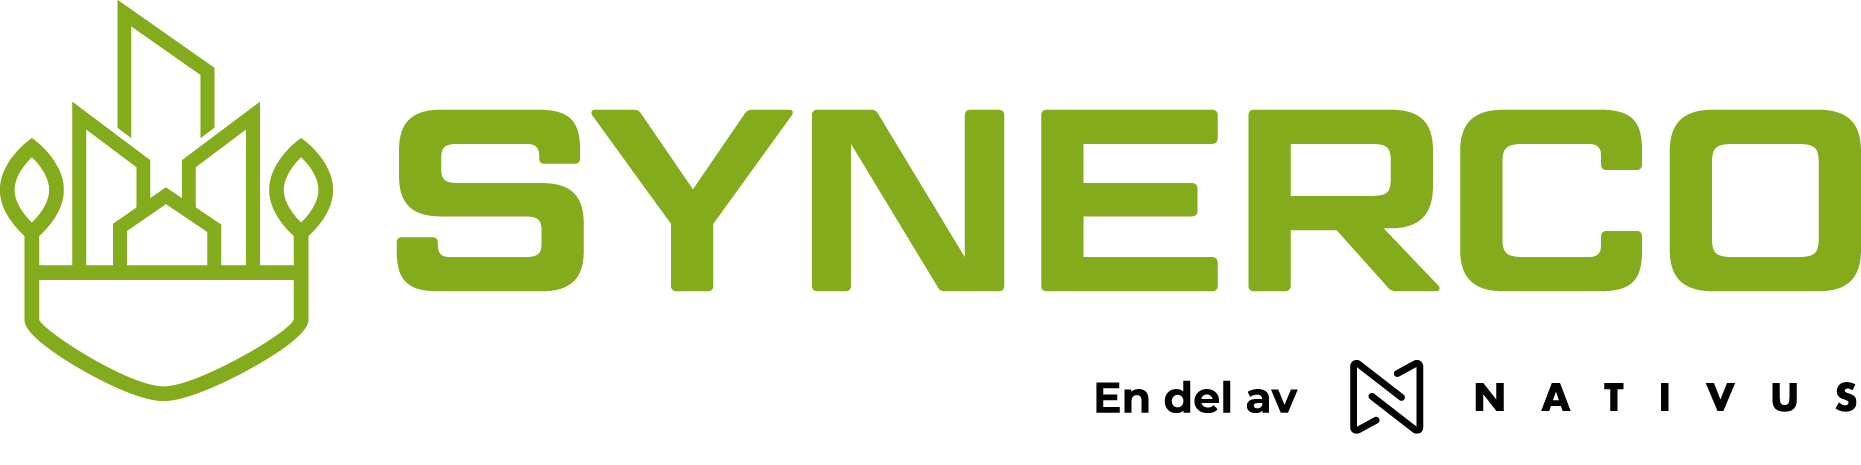 SYNERCO